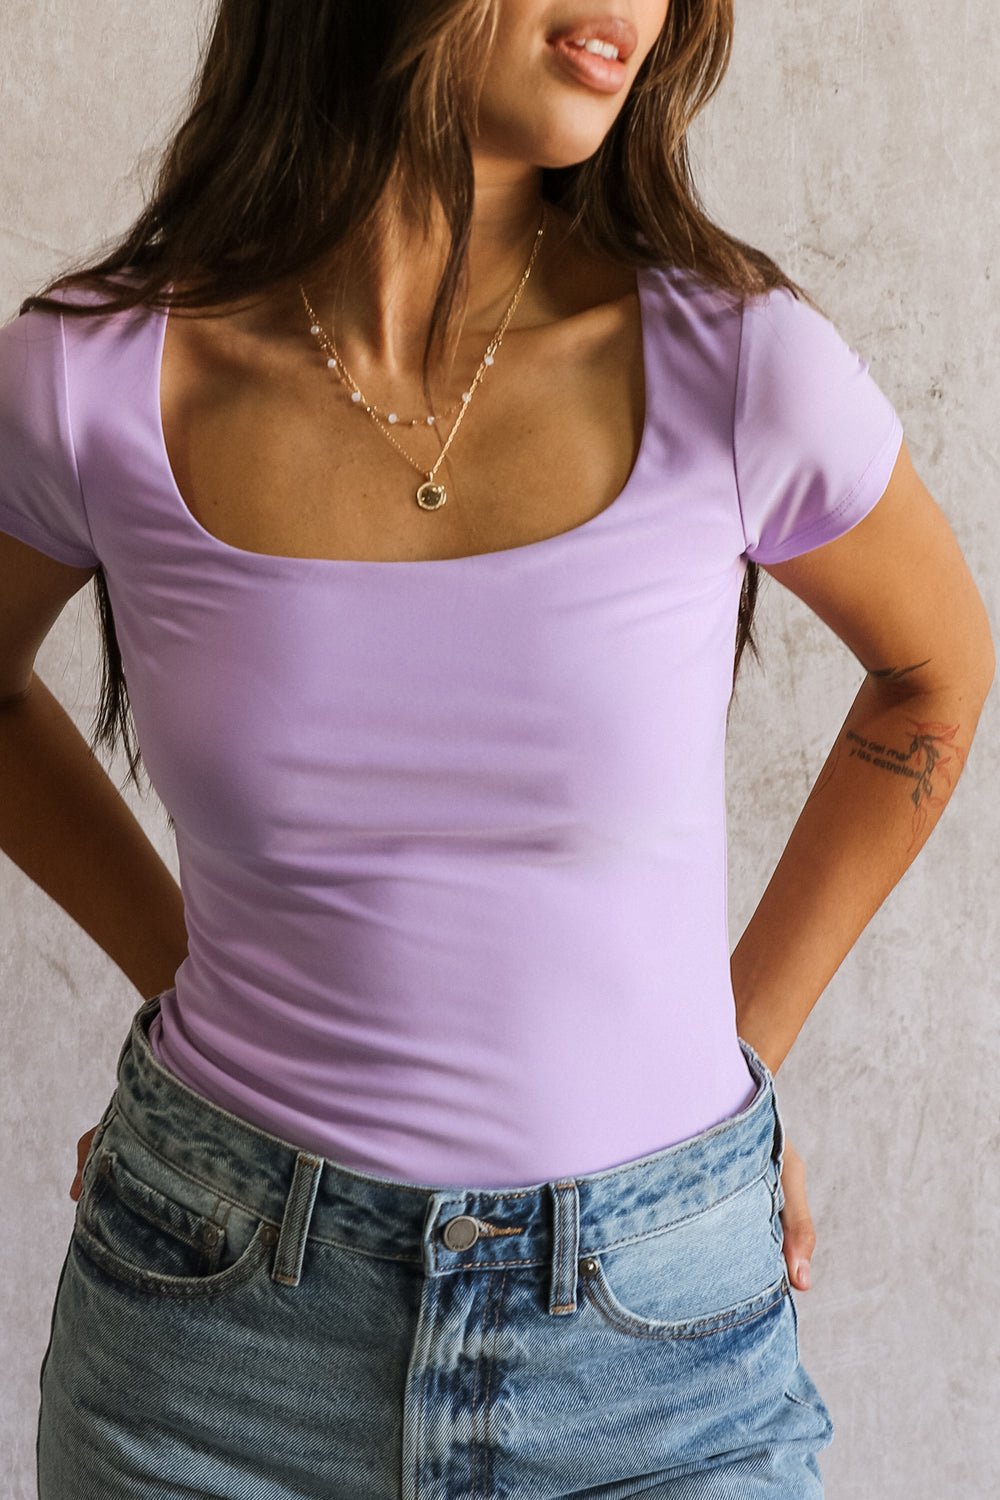 Close-up front view of female model wearing the Dani Lavender Short Sleeve Top that has stretchy lavender fabric, a square neck, and short sleeves.